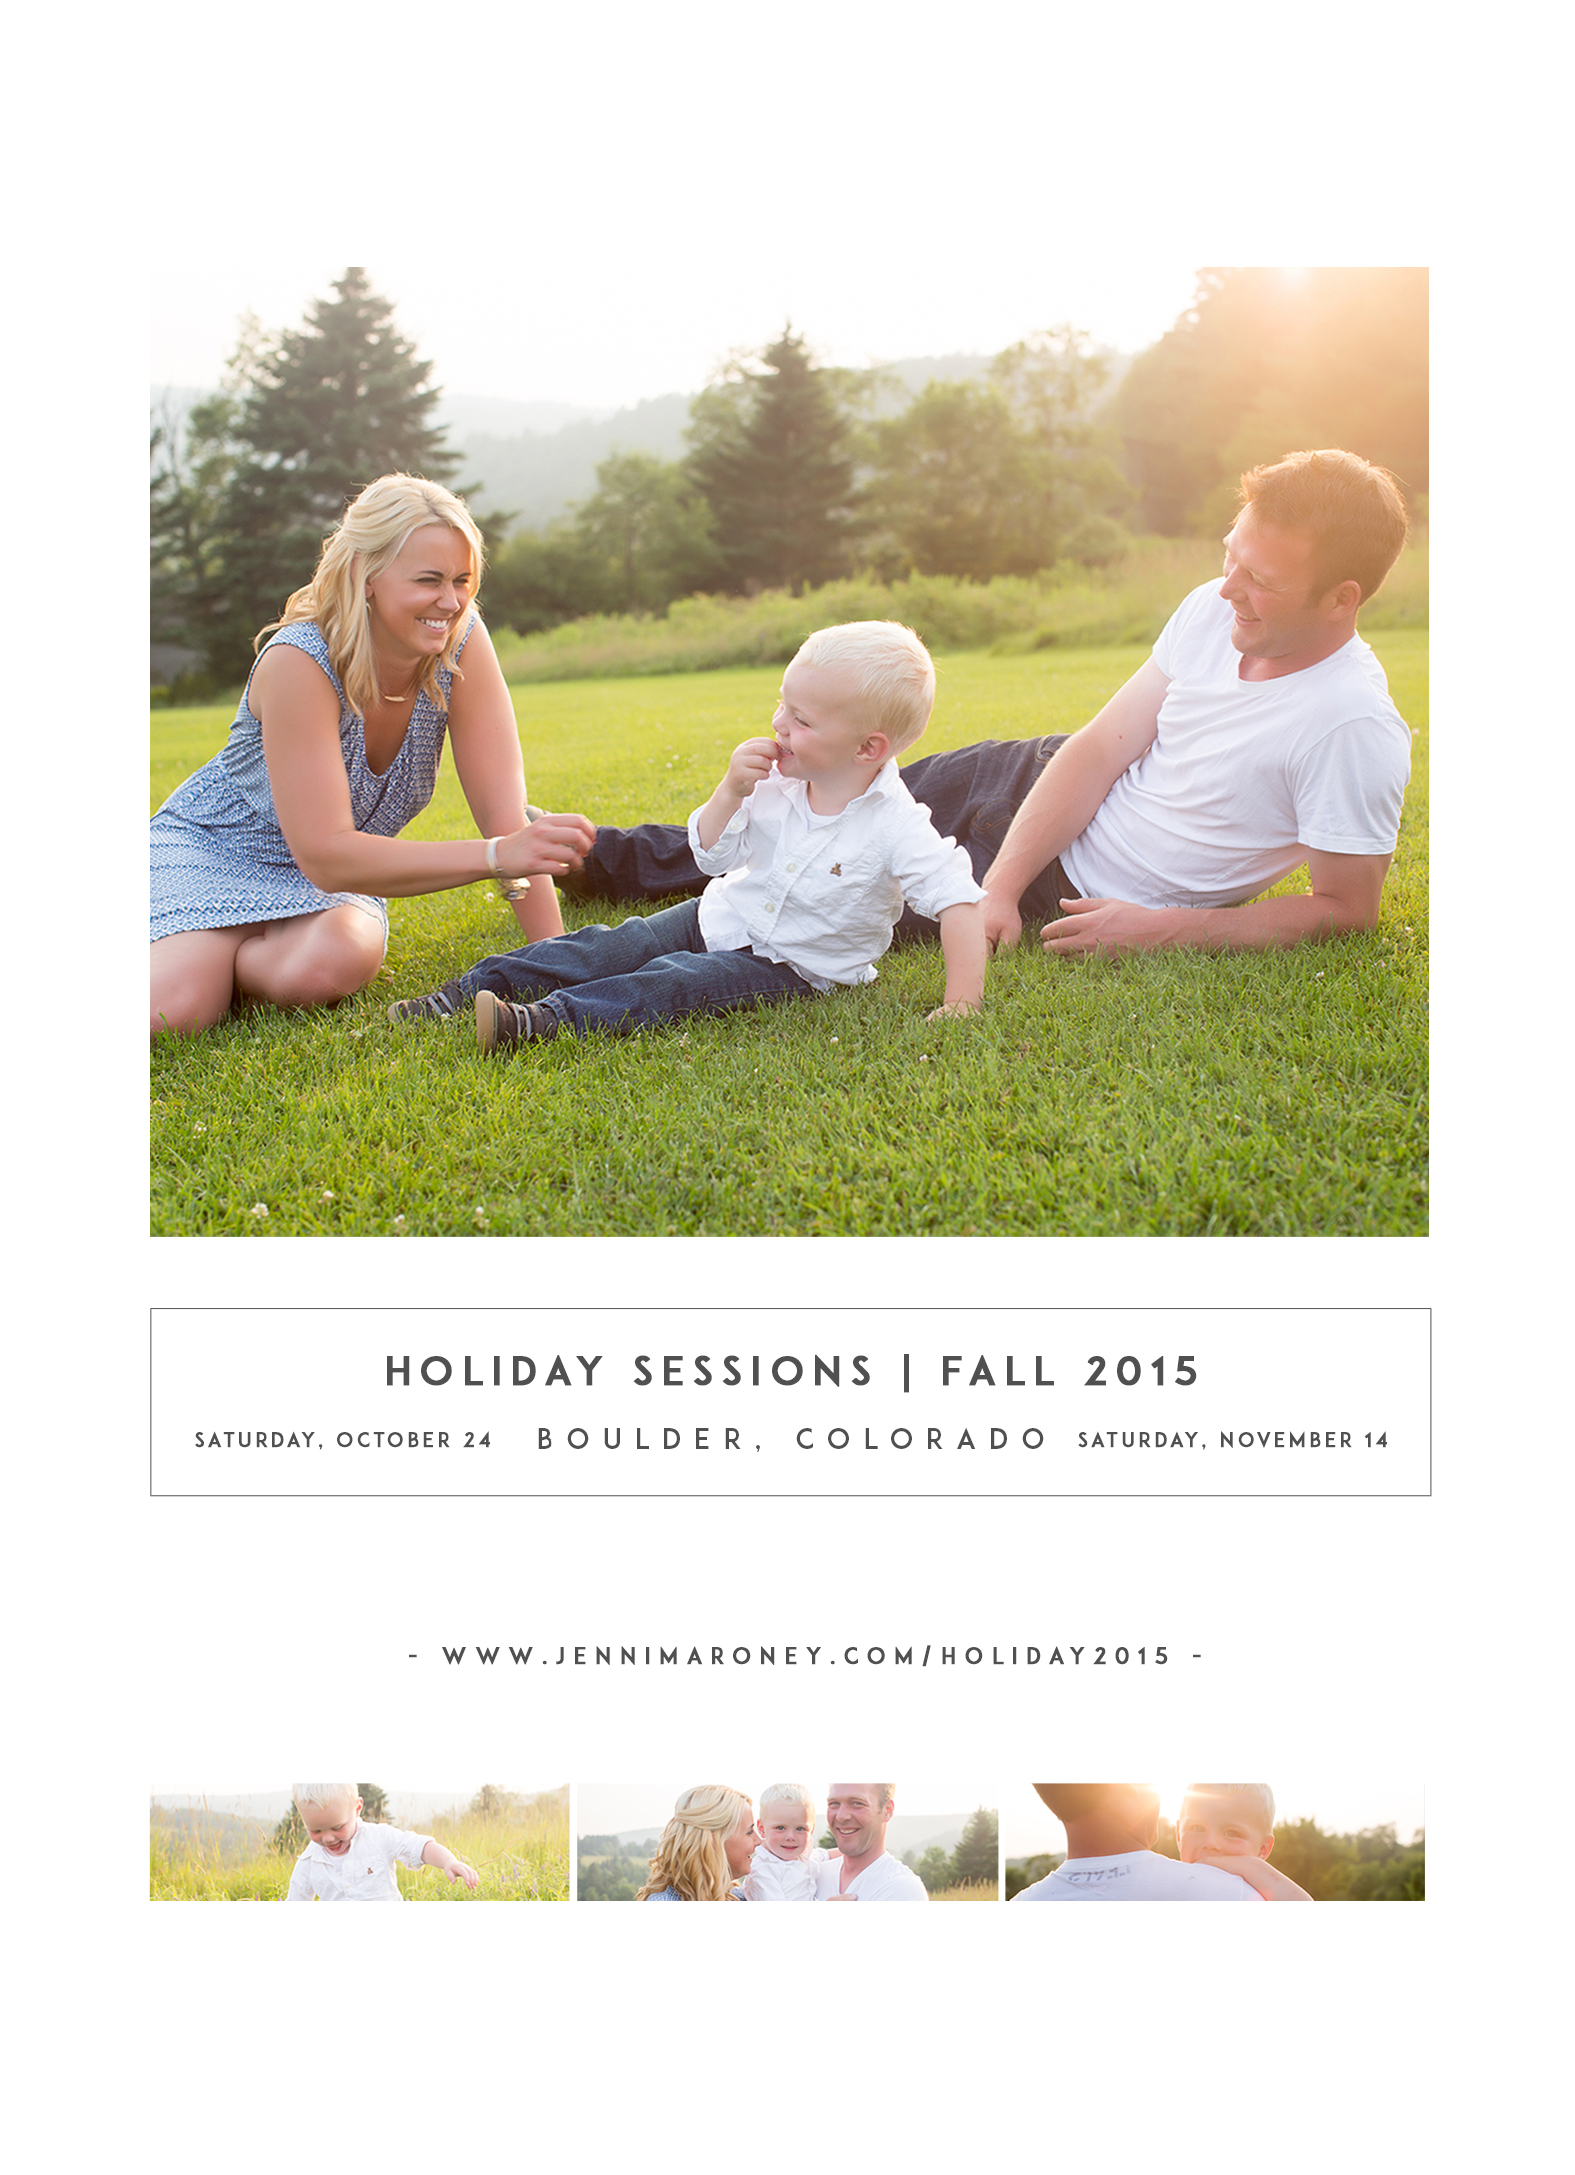 Boulder family photographer Jenni Maroney offers 2 days only this year for holiday sessions in Boulder.